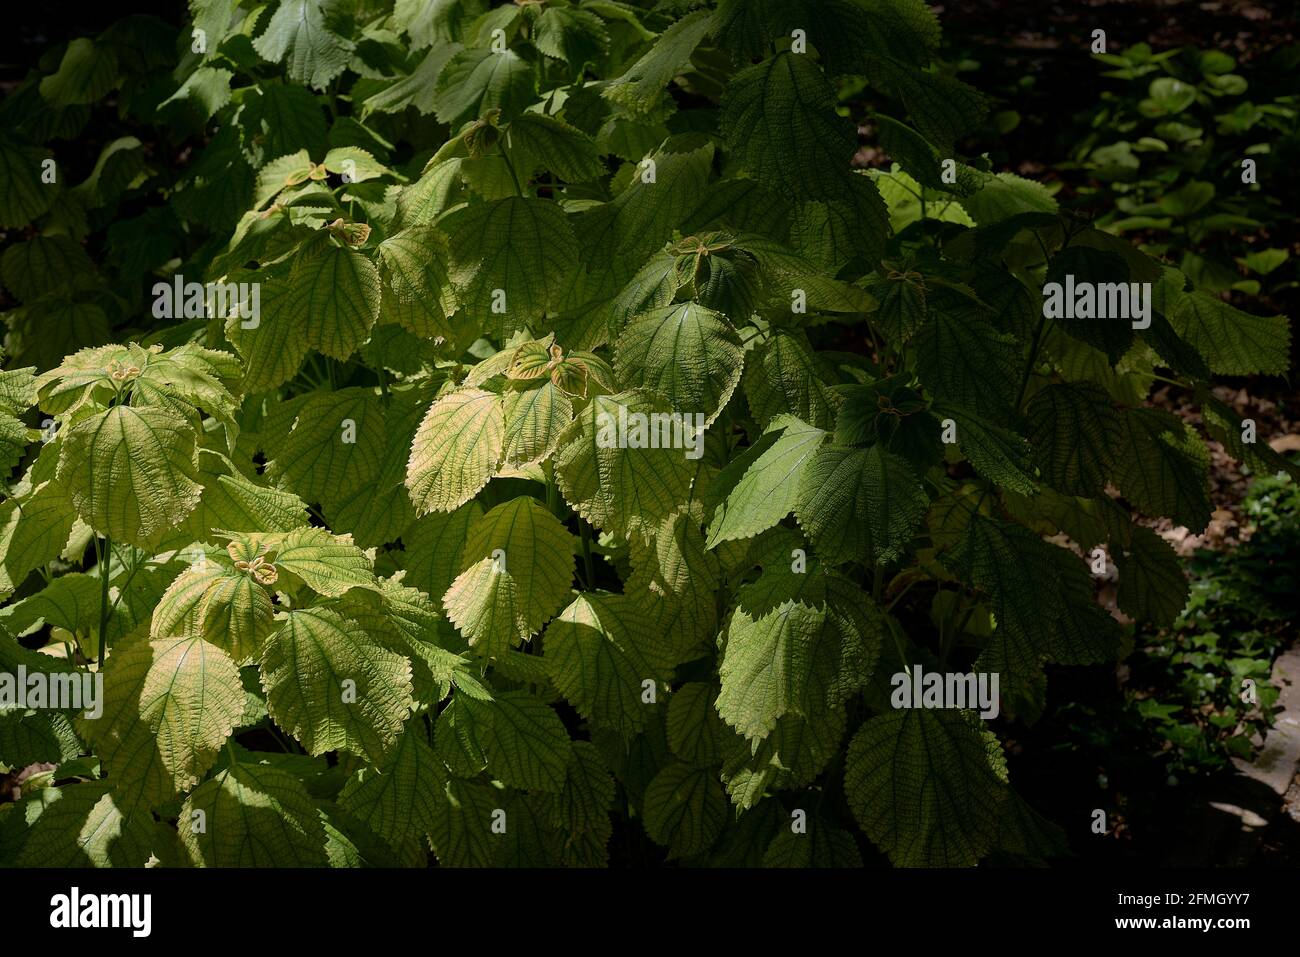 Group of white nettle leaves. Boehmeria nivea. Unfocussed background, and sunlit leaves. Stock Photo